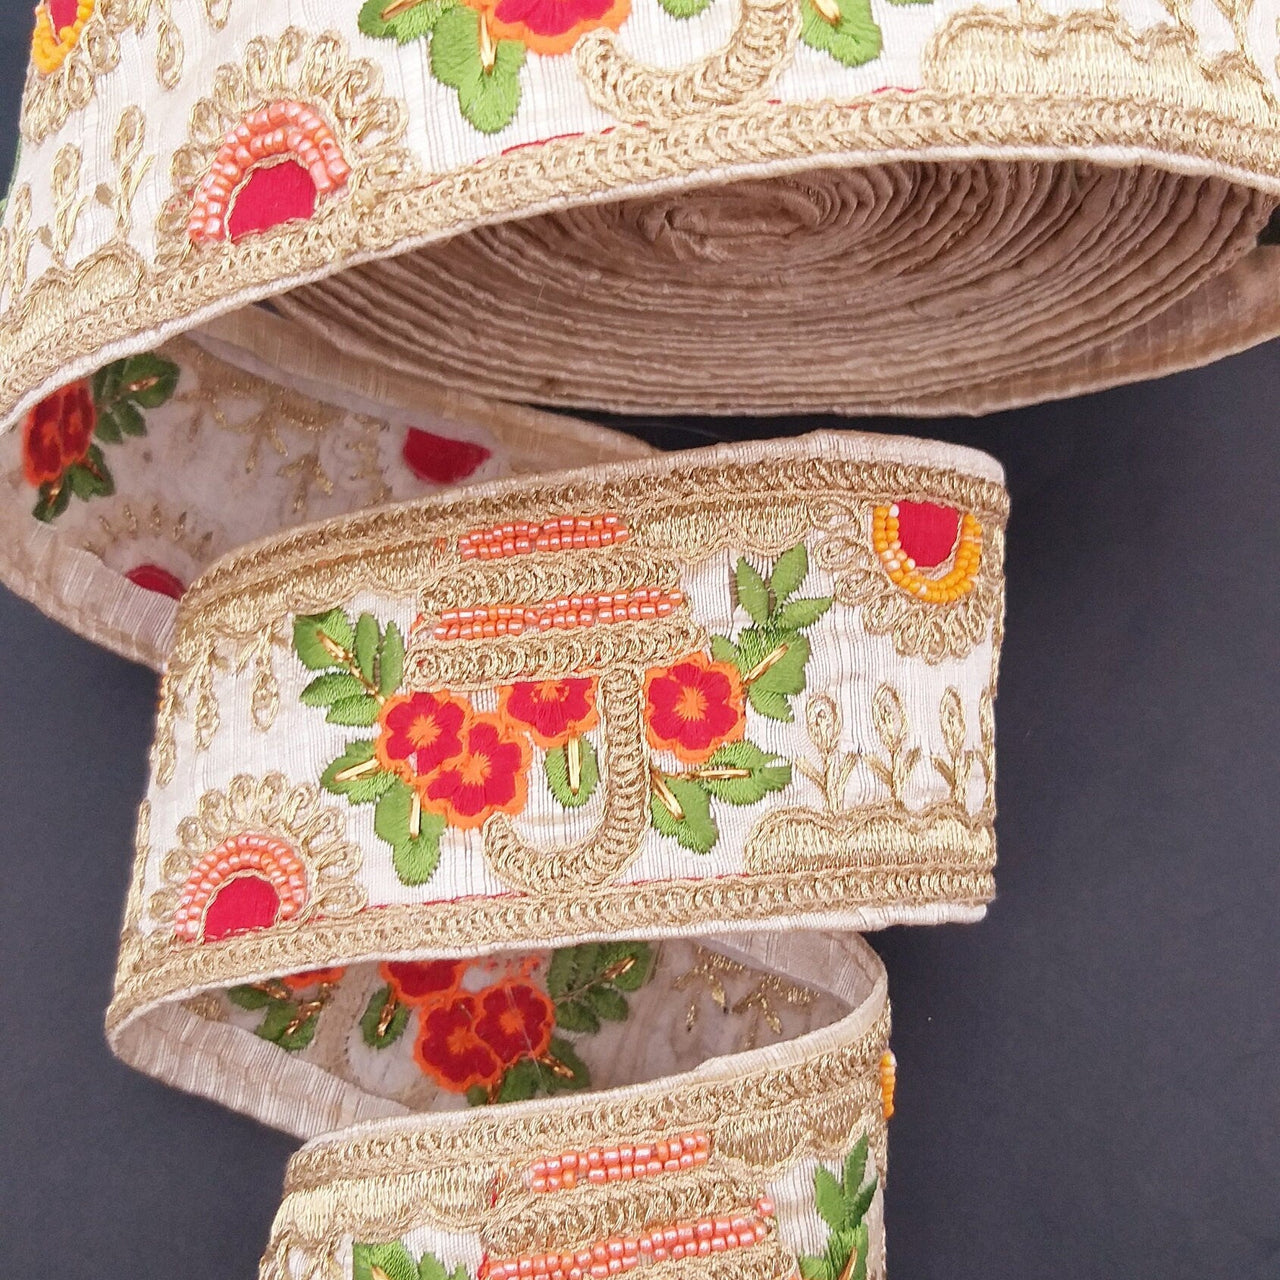 Beige Art Silk Fabric Trim With Green, Orange, Red And Gold Floral Embroidery